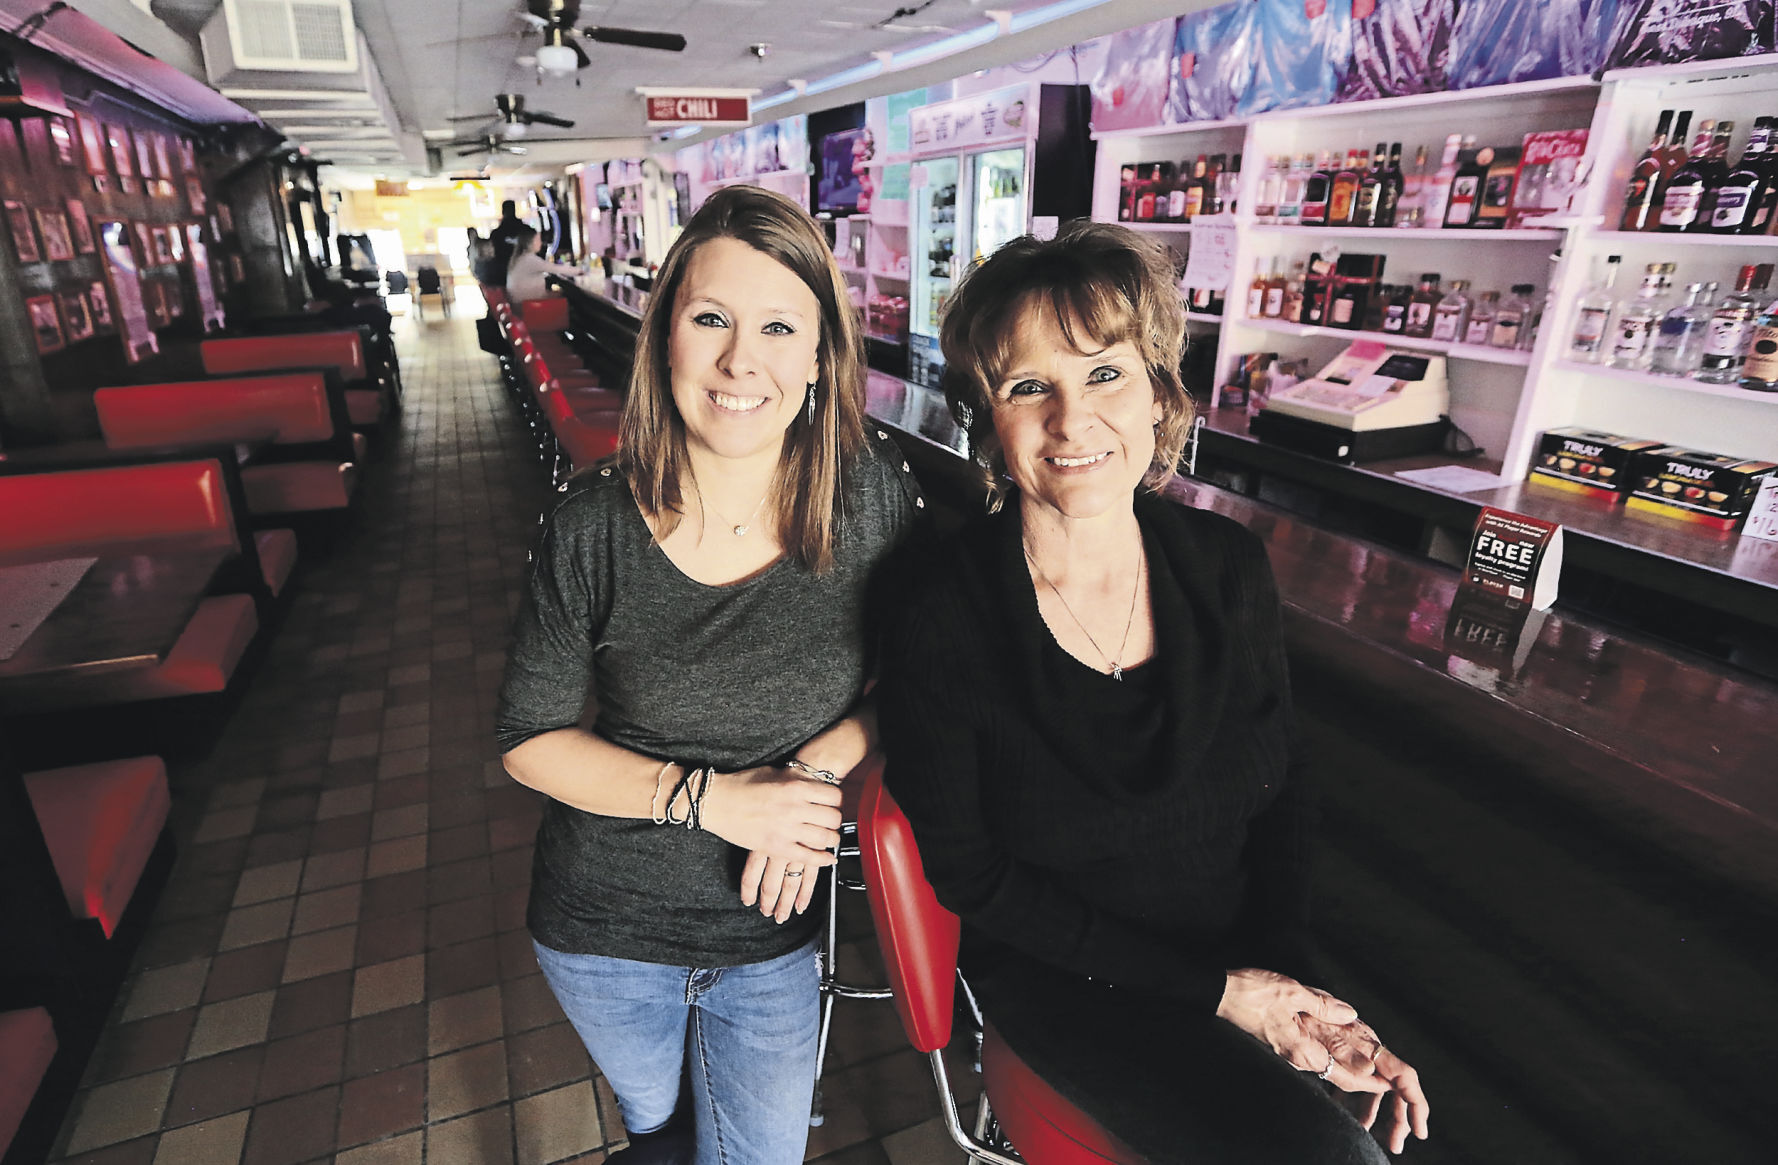 Owner Dalene Temperley (right) and her daughter, Terissa Ohnesorge, operate Mulgrew’s Tavern, Slots & Liquor Store in East Dubuque, Ill. They have continued the establishment’s family ownership tradition that began 100 years ago. PHOTO CREDIT: NICKI KOHL